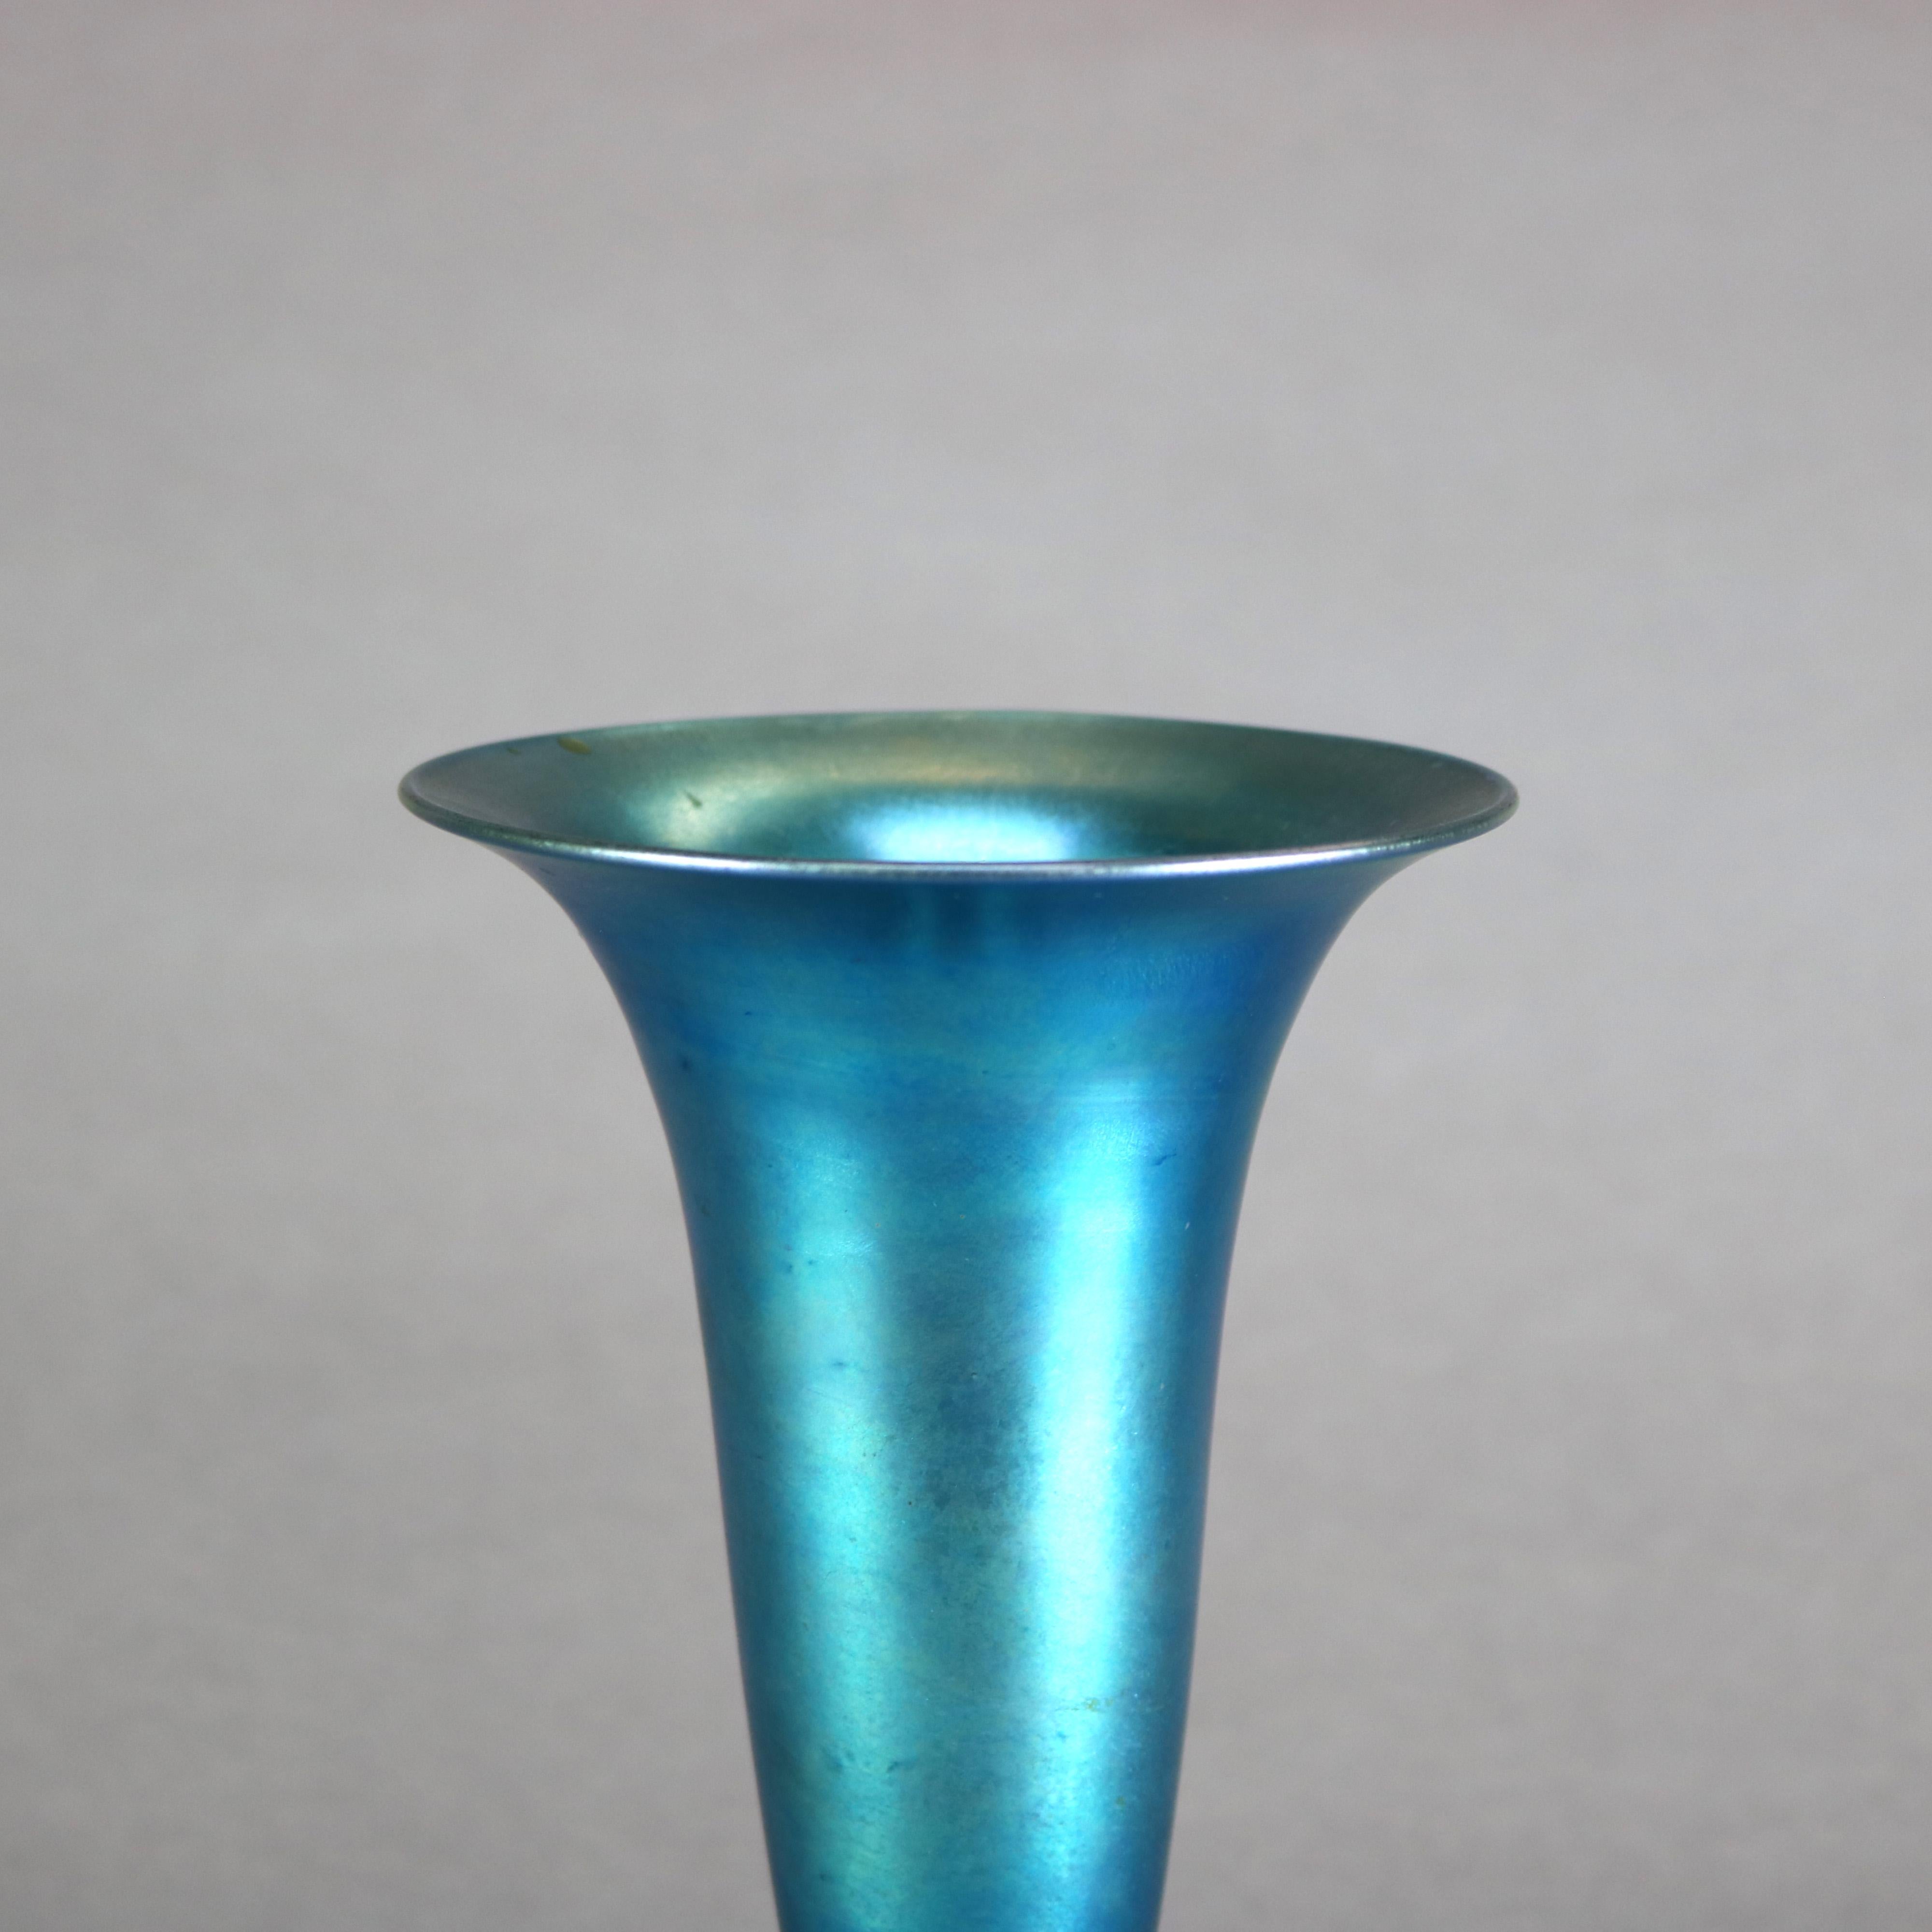 An antique Arts & Crafts art glass vase by Steuben offers a trumpet form in blue aurene seated on a flared sterling silver base, circa 1920. 

Measures: 9.5